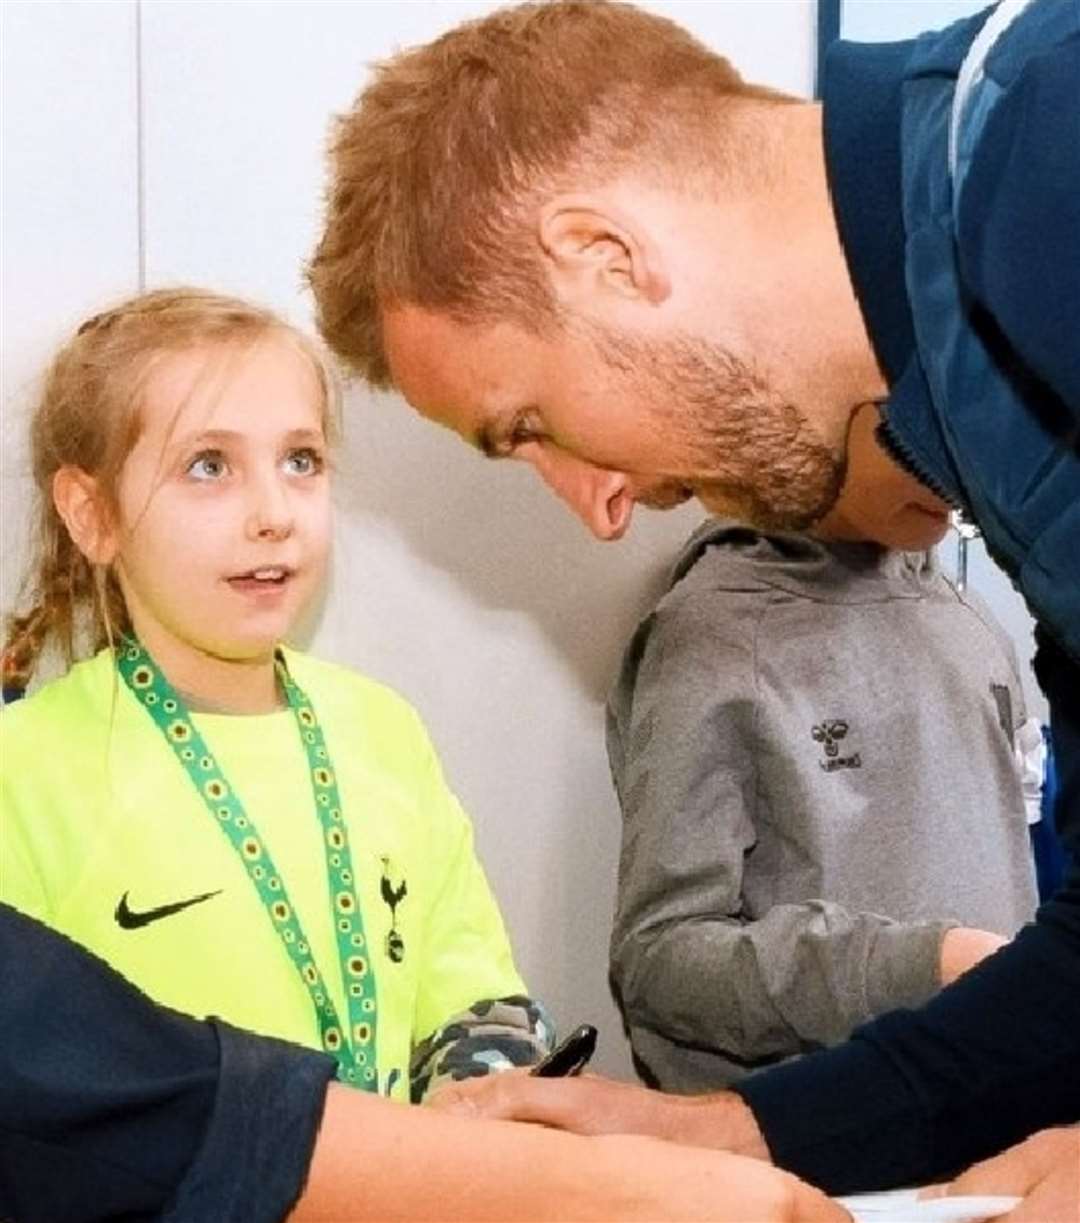 Caitlin Passey with footballer Harry Kane (Nick Passey/PA)